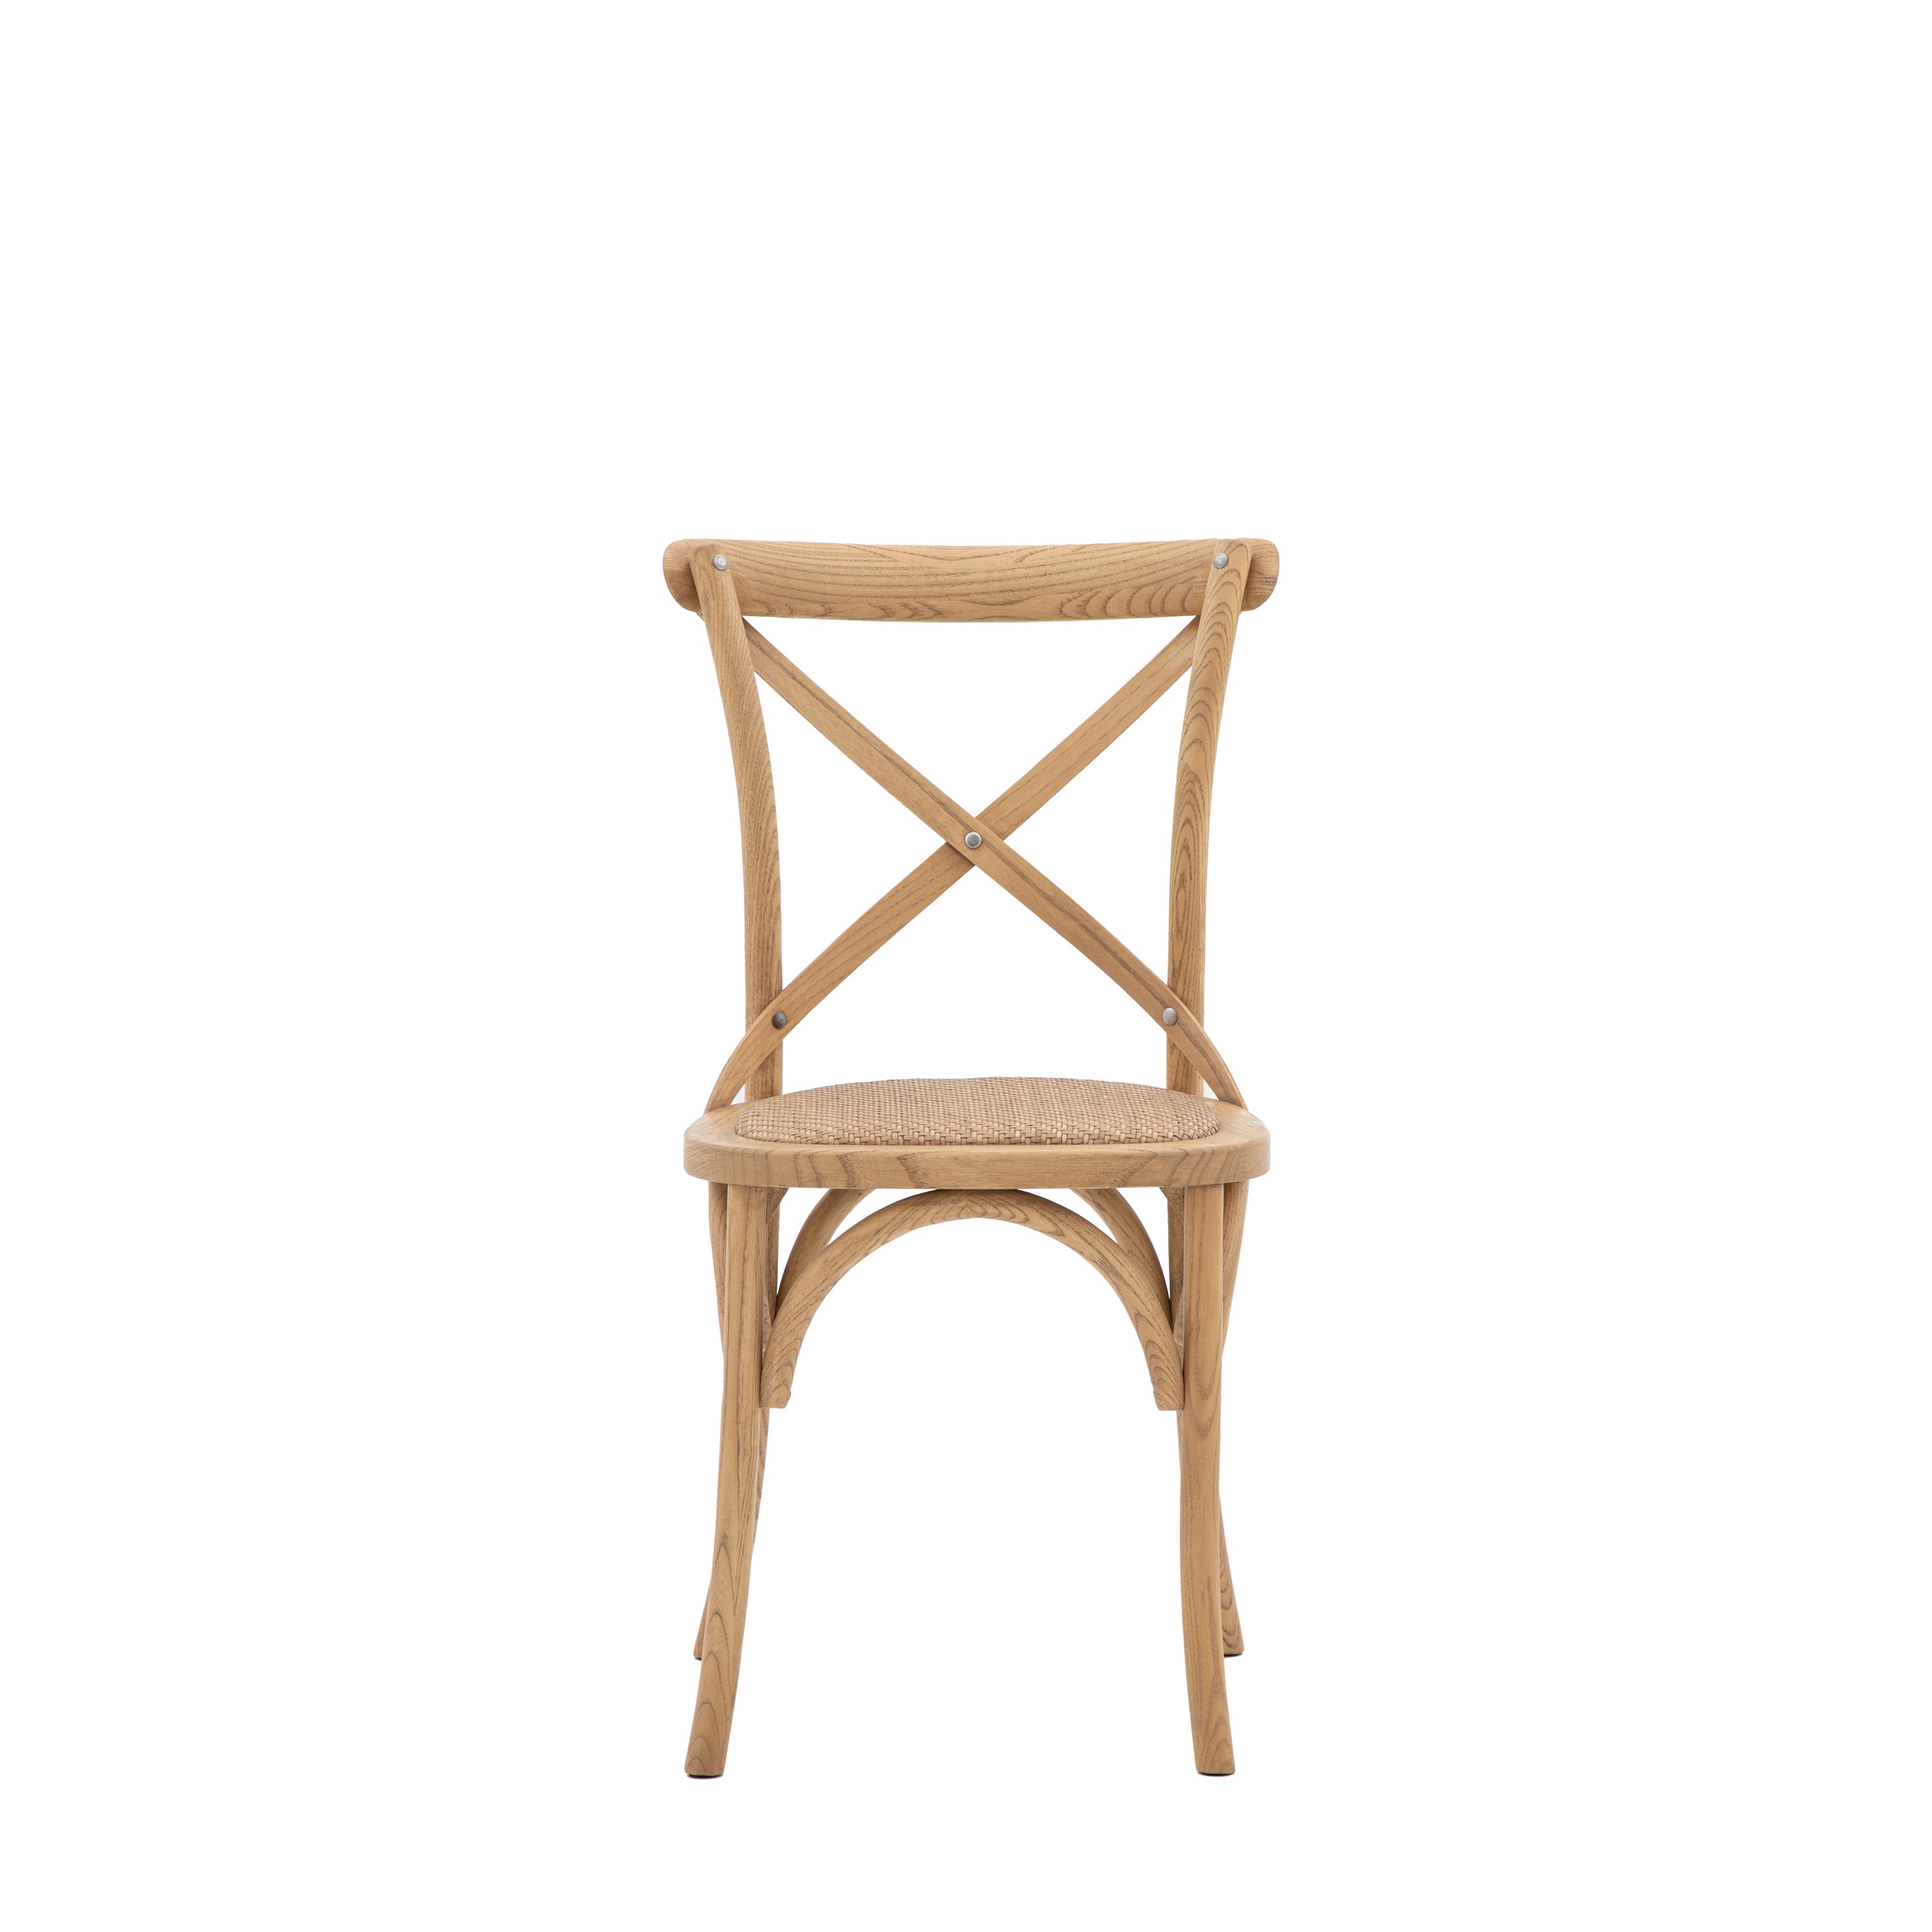 Caffe Chair Natural Rattan Set of 2